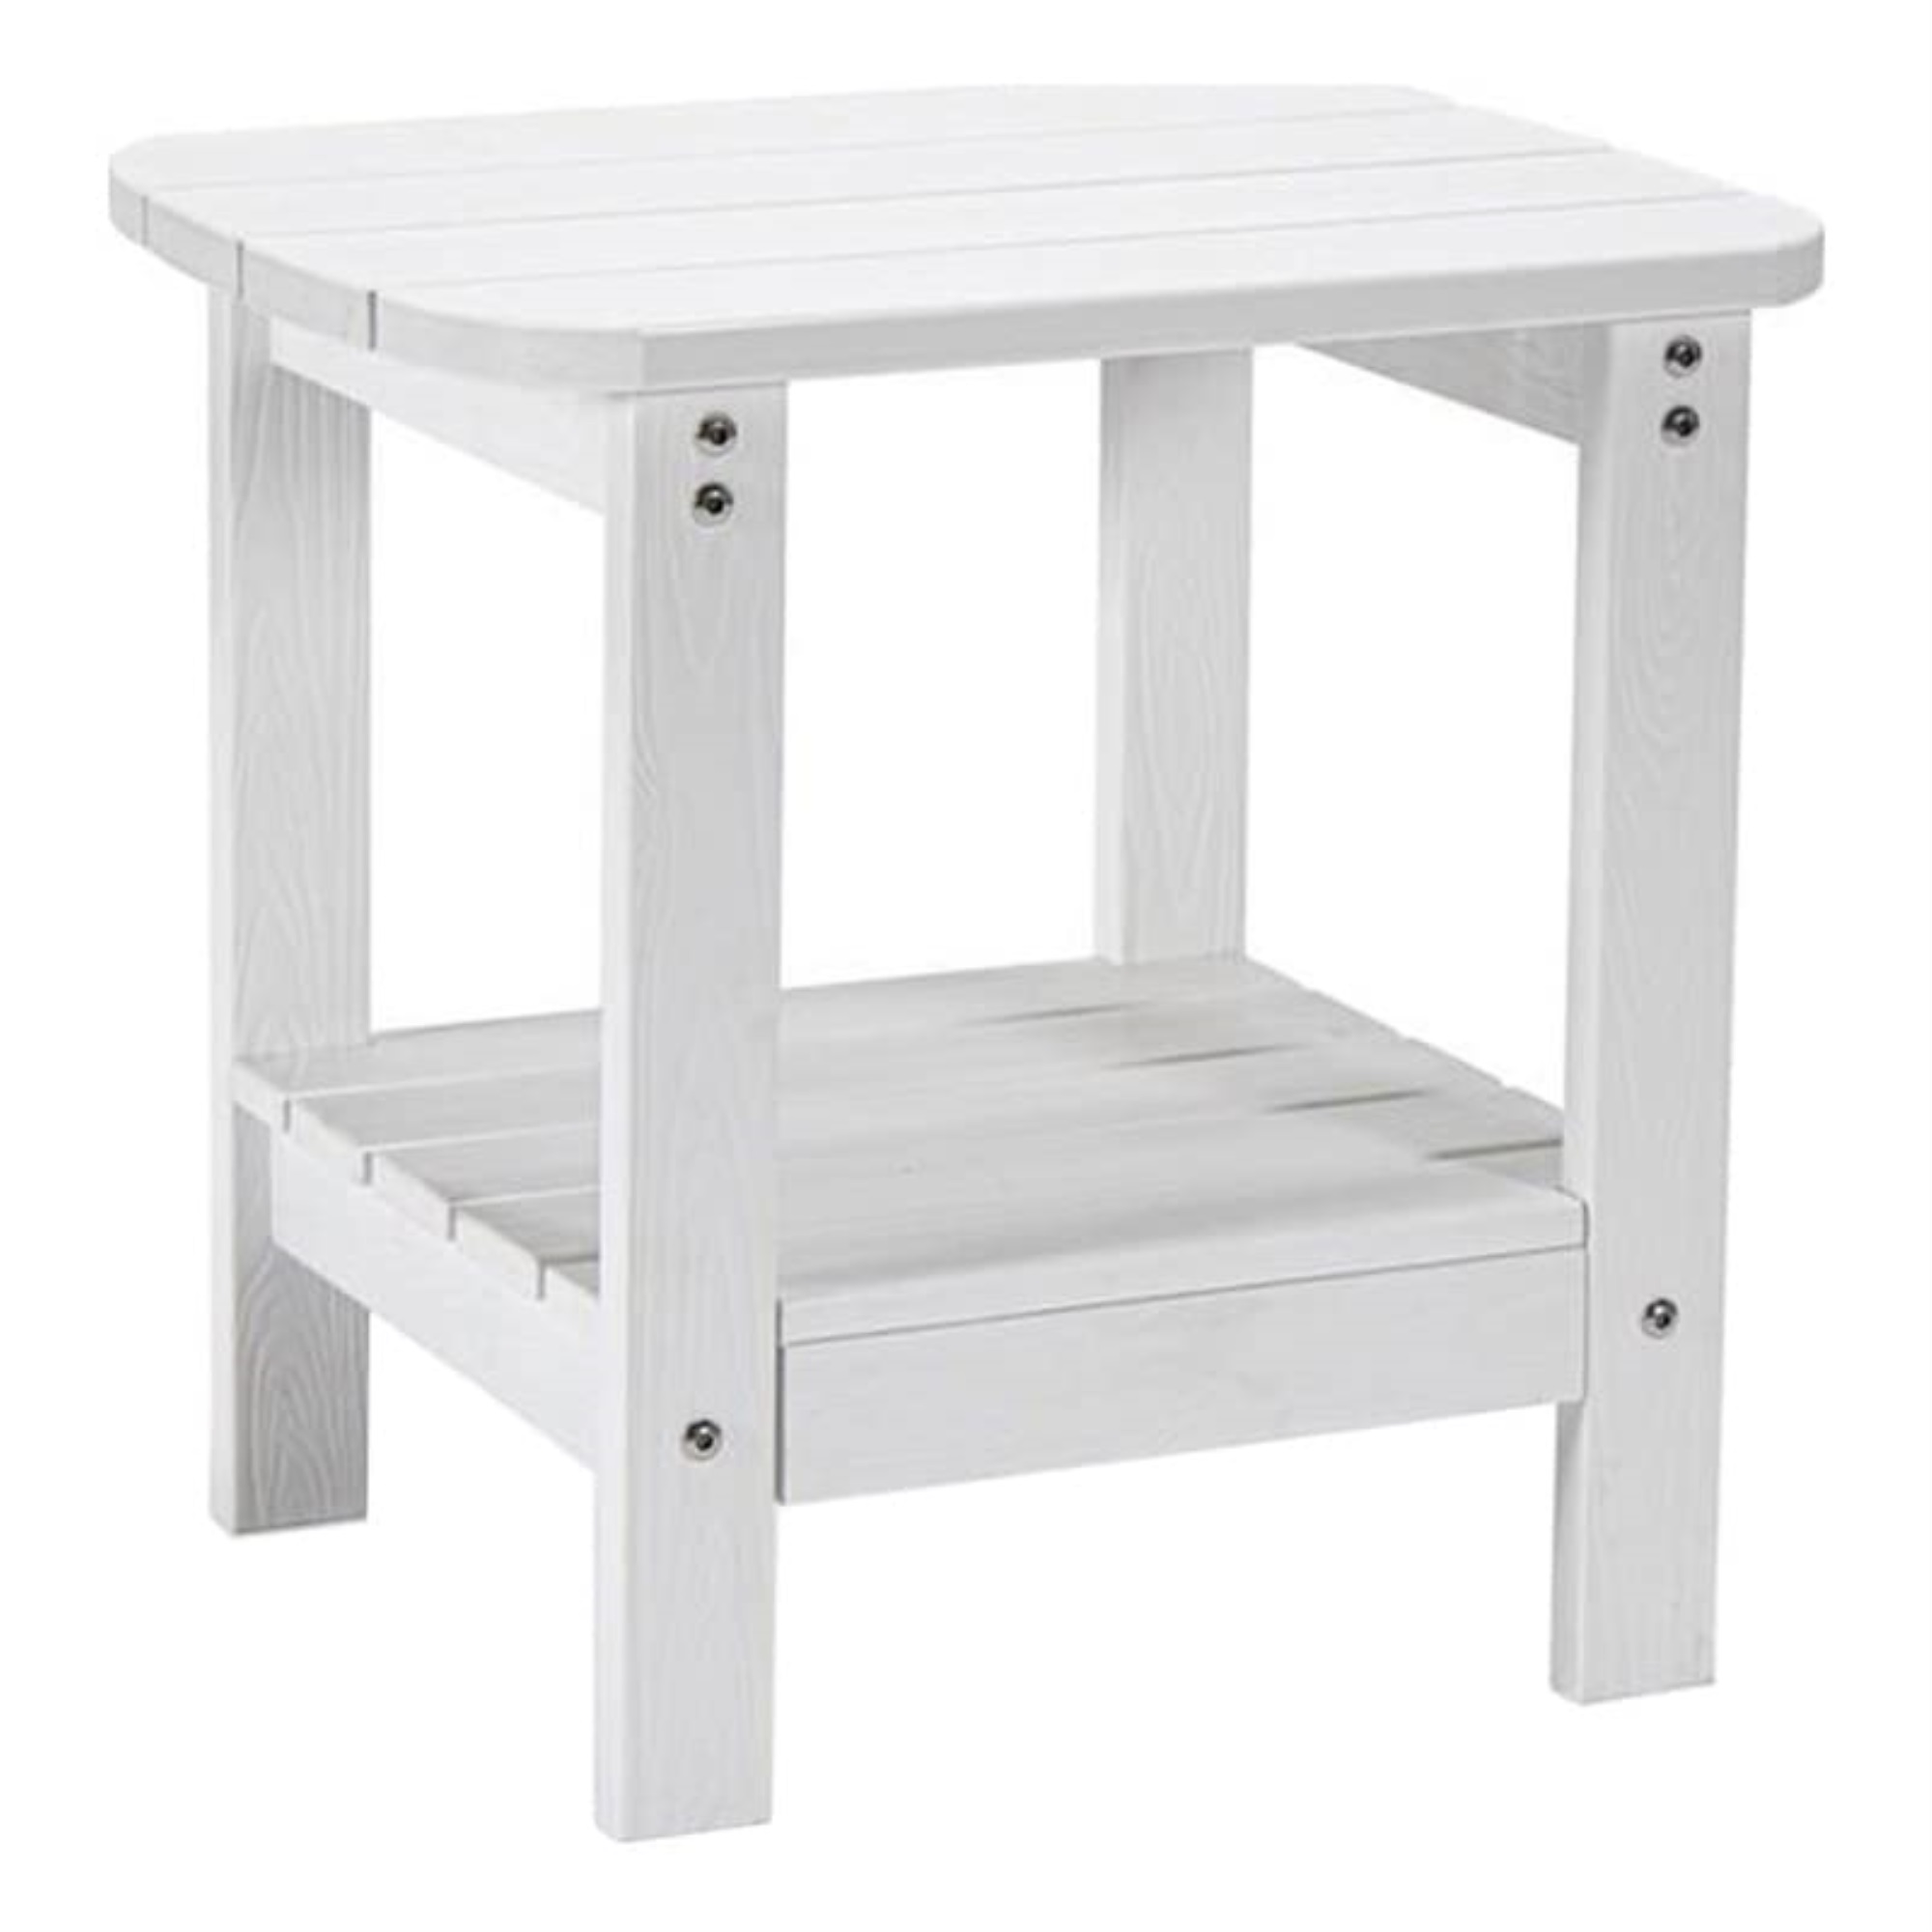 Posh Living Clive Outdoor Side Table White - image 1 of 9